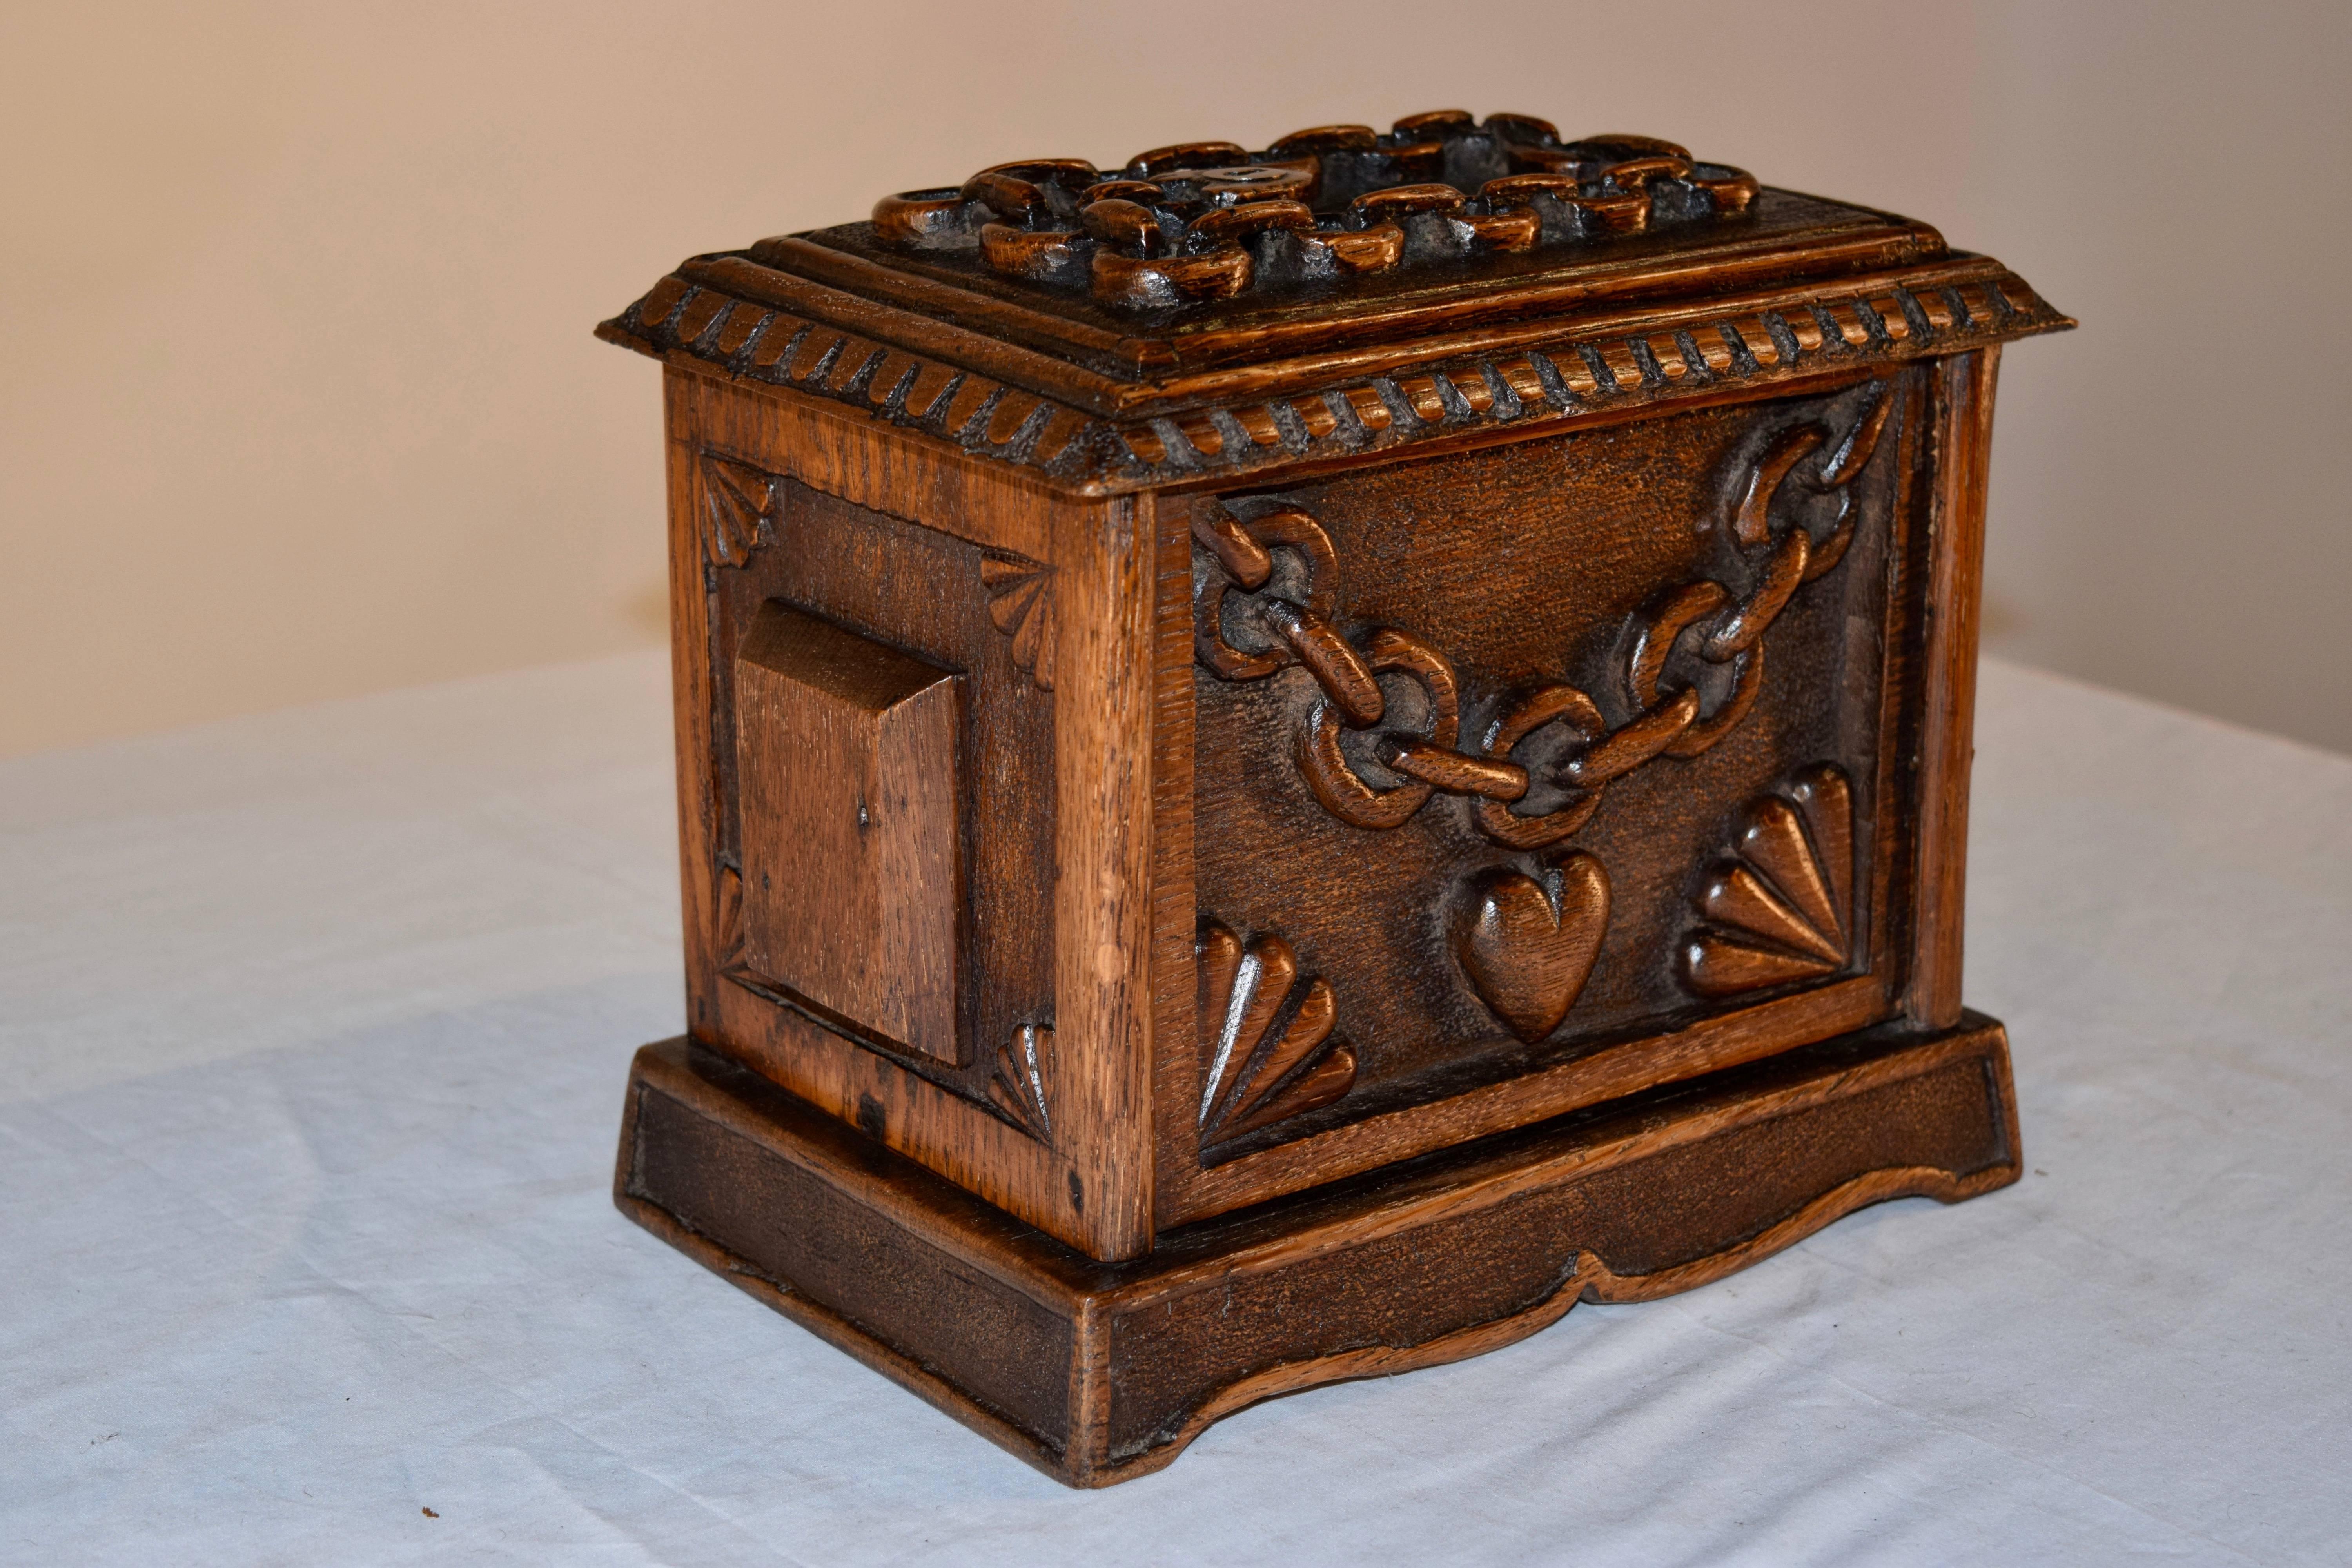 19th century hand-carved Folk Art jewelry box with chain and heart design made from oak from England. It has an elaborately carved top and sides with a single drawer which opens from the side to reveal a storage compartment.